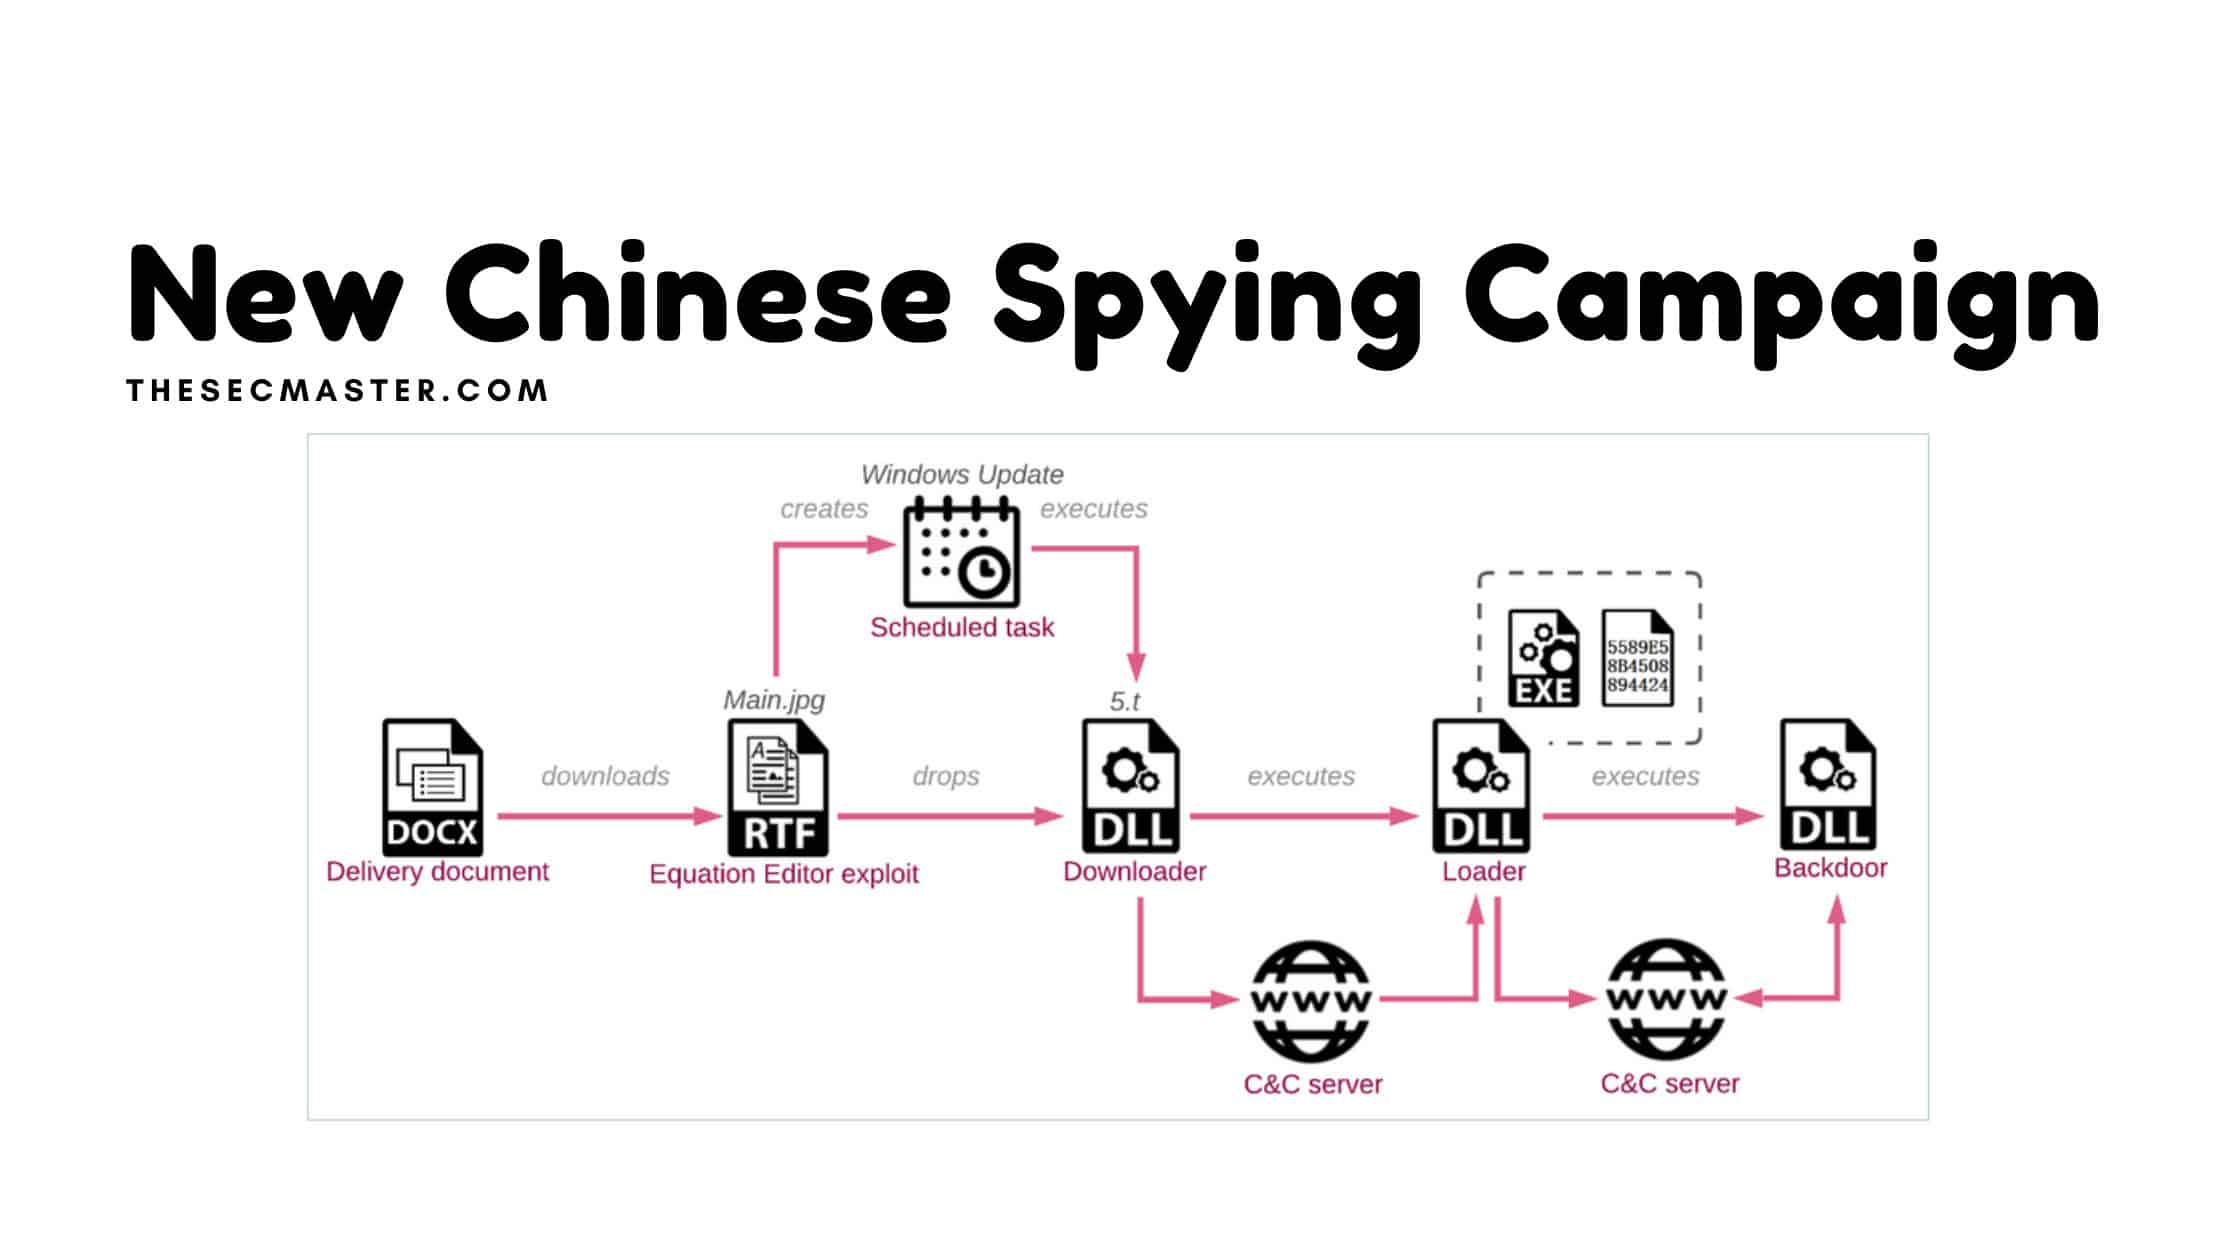 New Chinese Spying Campaign